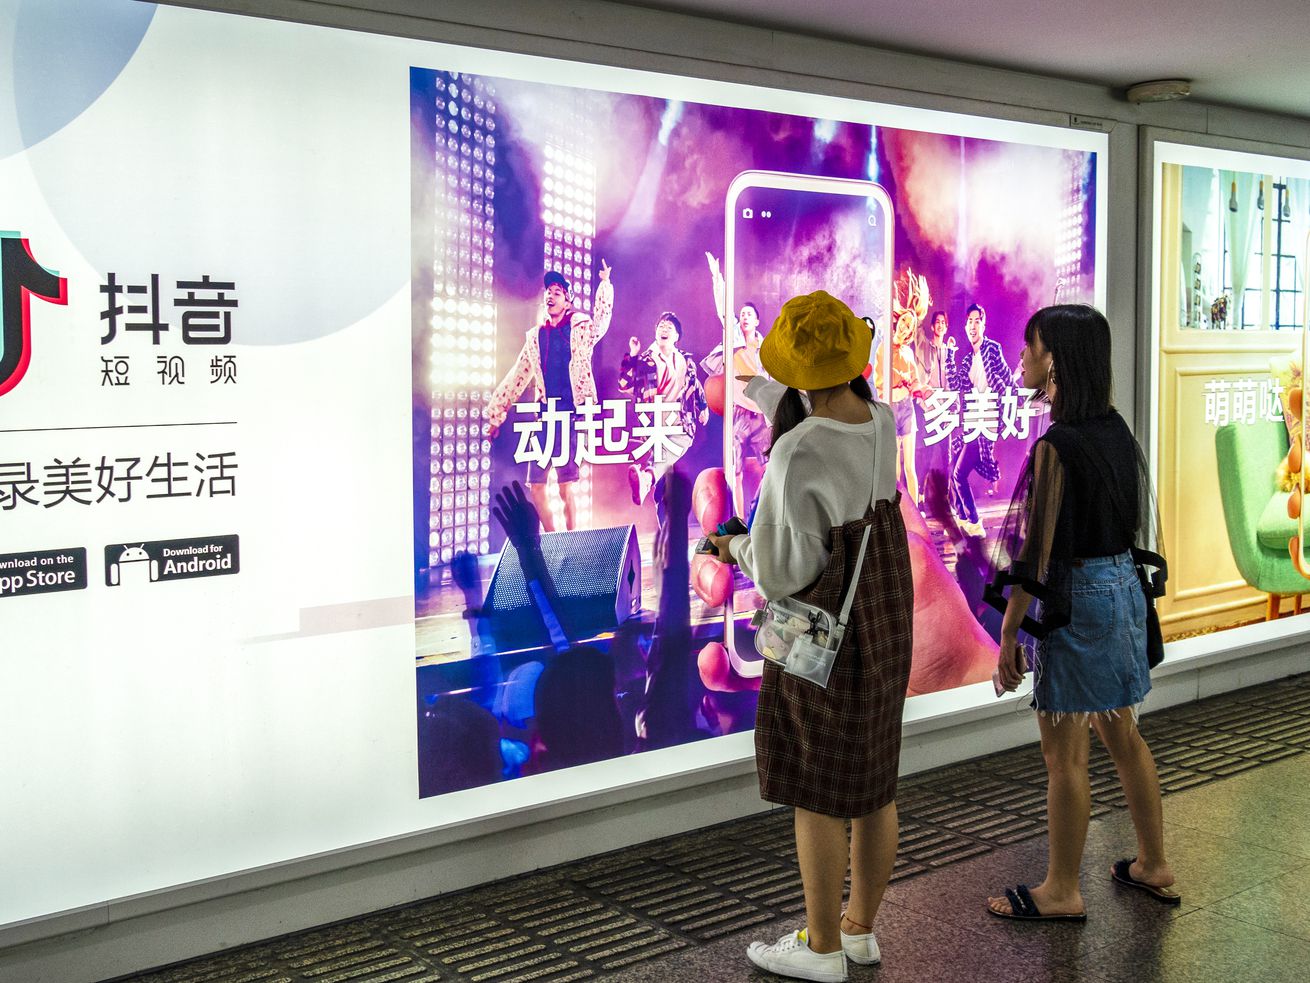 Two young women stand in front of a large digital billboard watching it display a Chinese ad for TikTok.